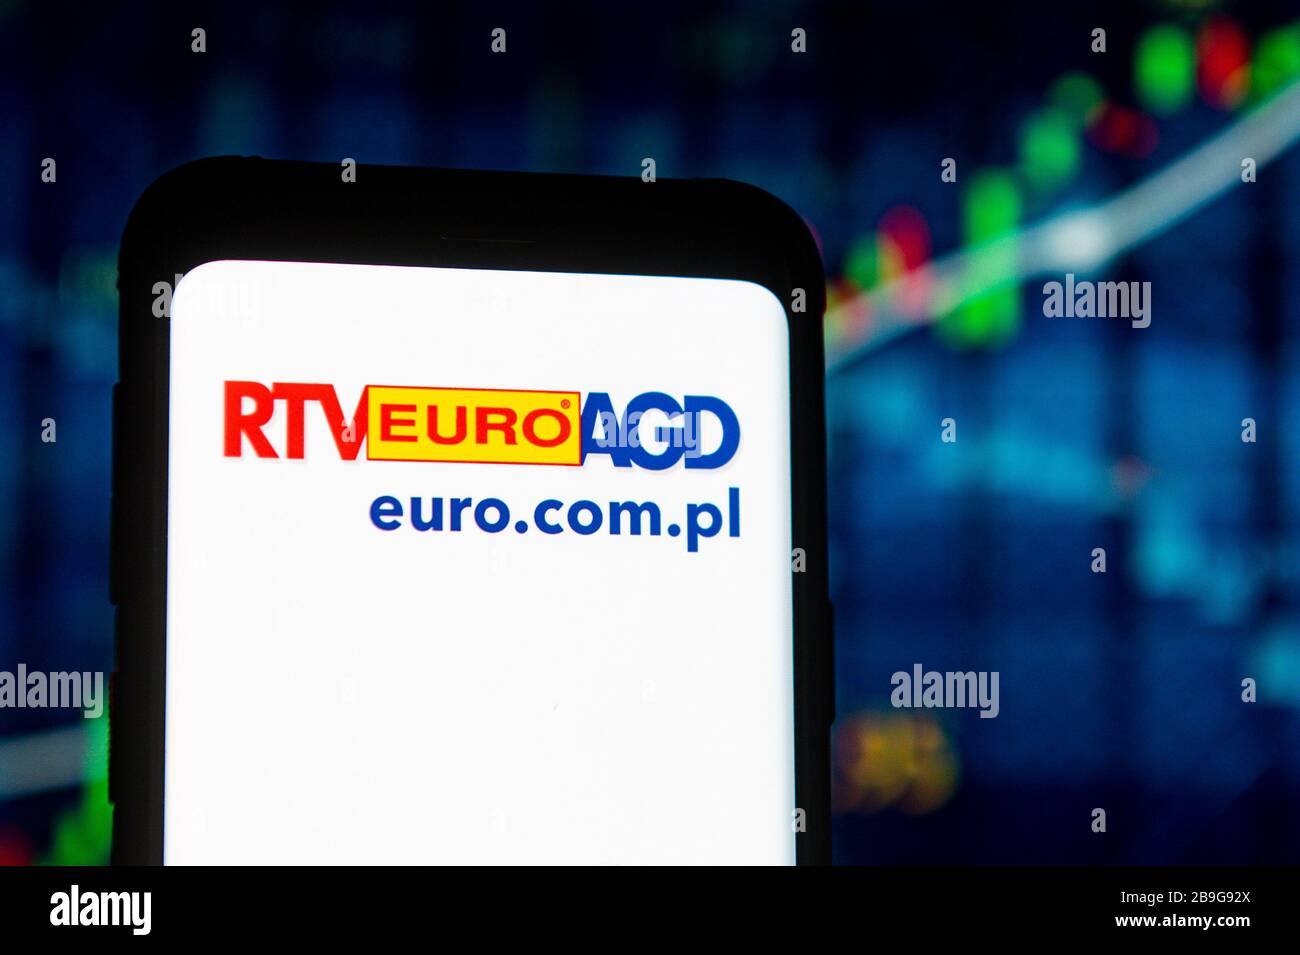 Rtv Euro Agd High Resolution Stock Photography and Images - Alamy